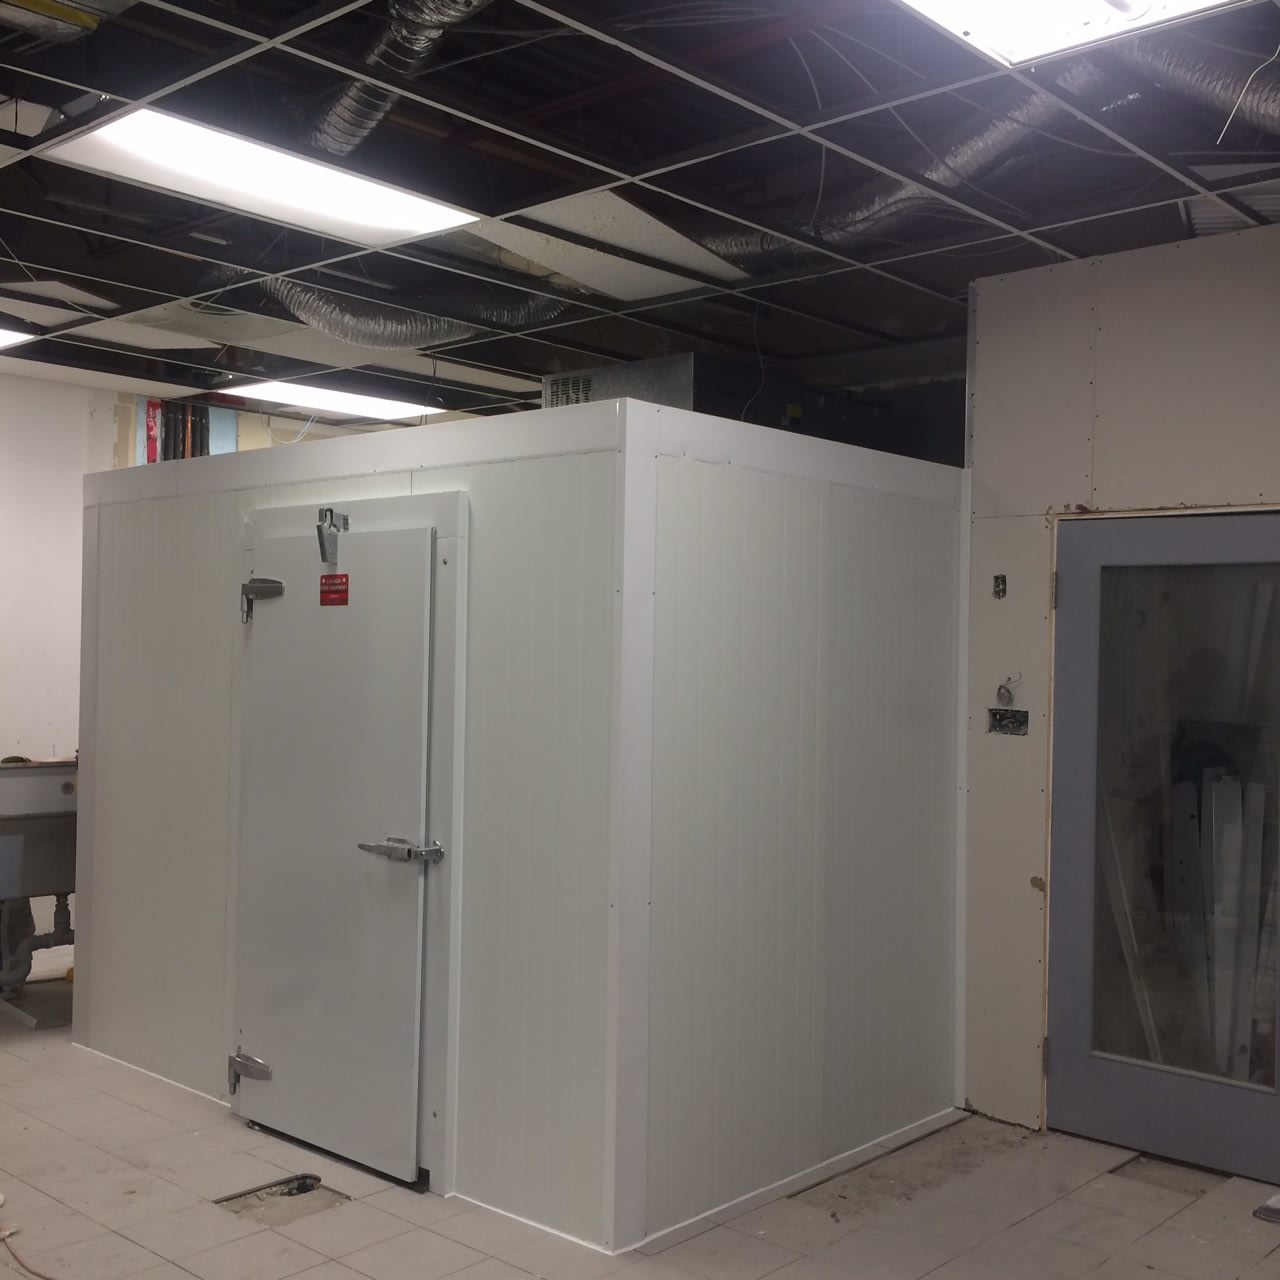 8x10x8H Walk-In Freezer - Self Contained (NEW) - F8108NSC